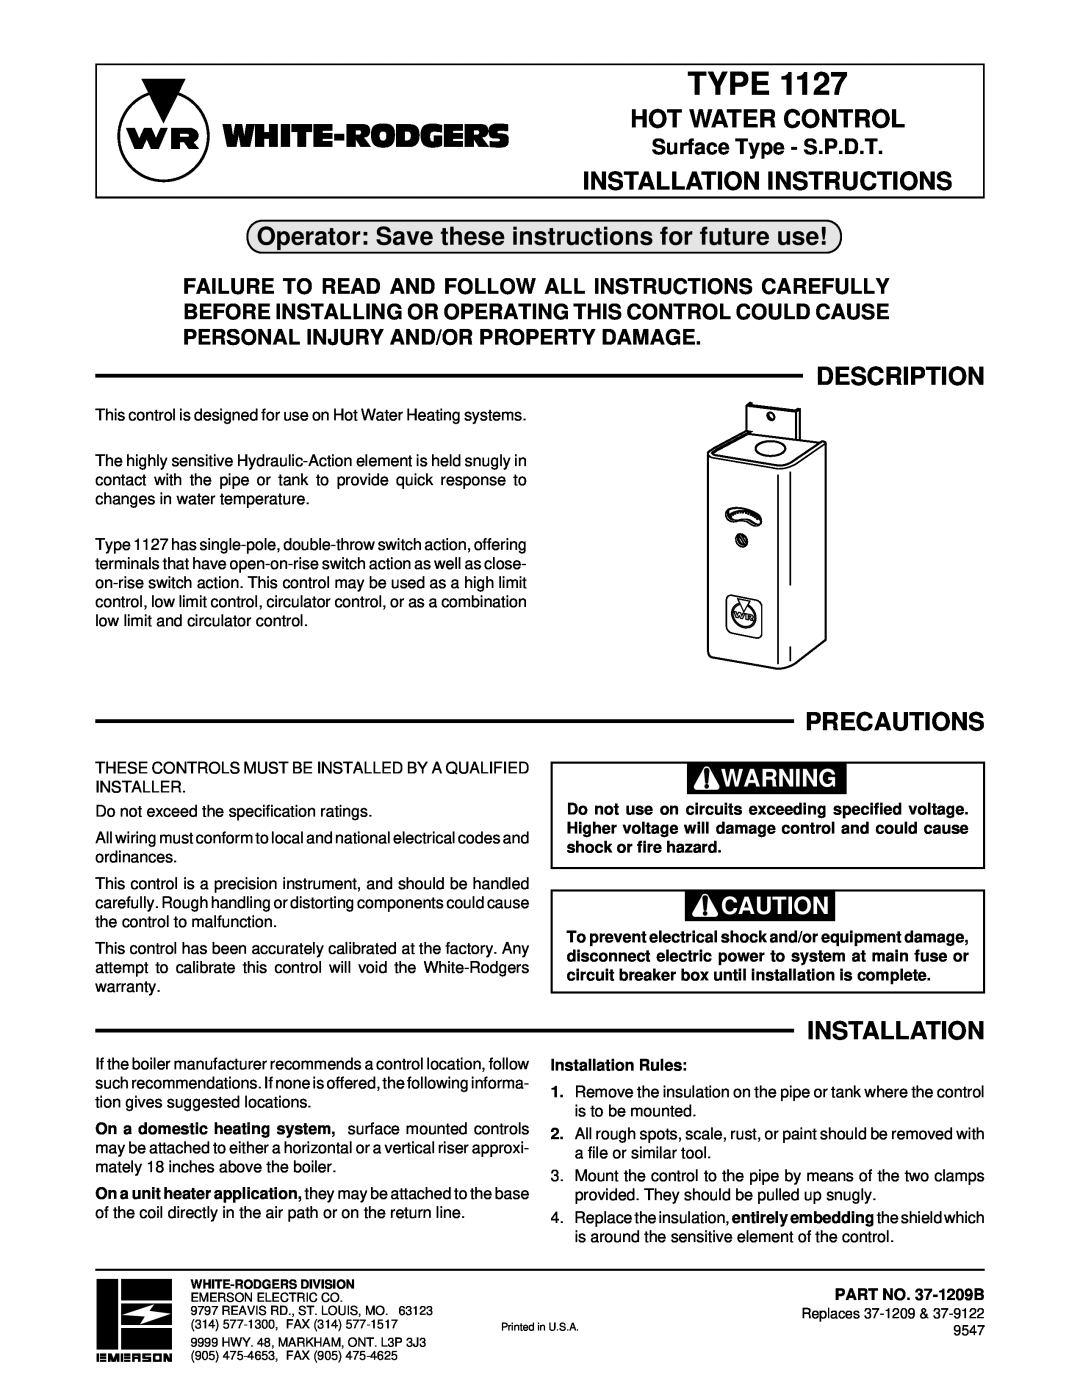 White Rodgers 1127 installation instructions White-Rodgers, Installation Instructions, Description, Precautions, Type 